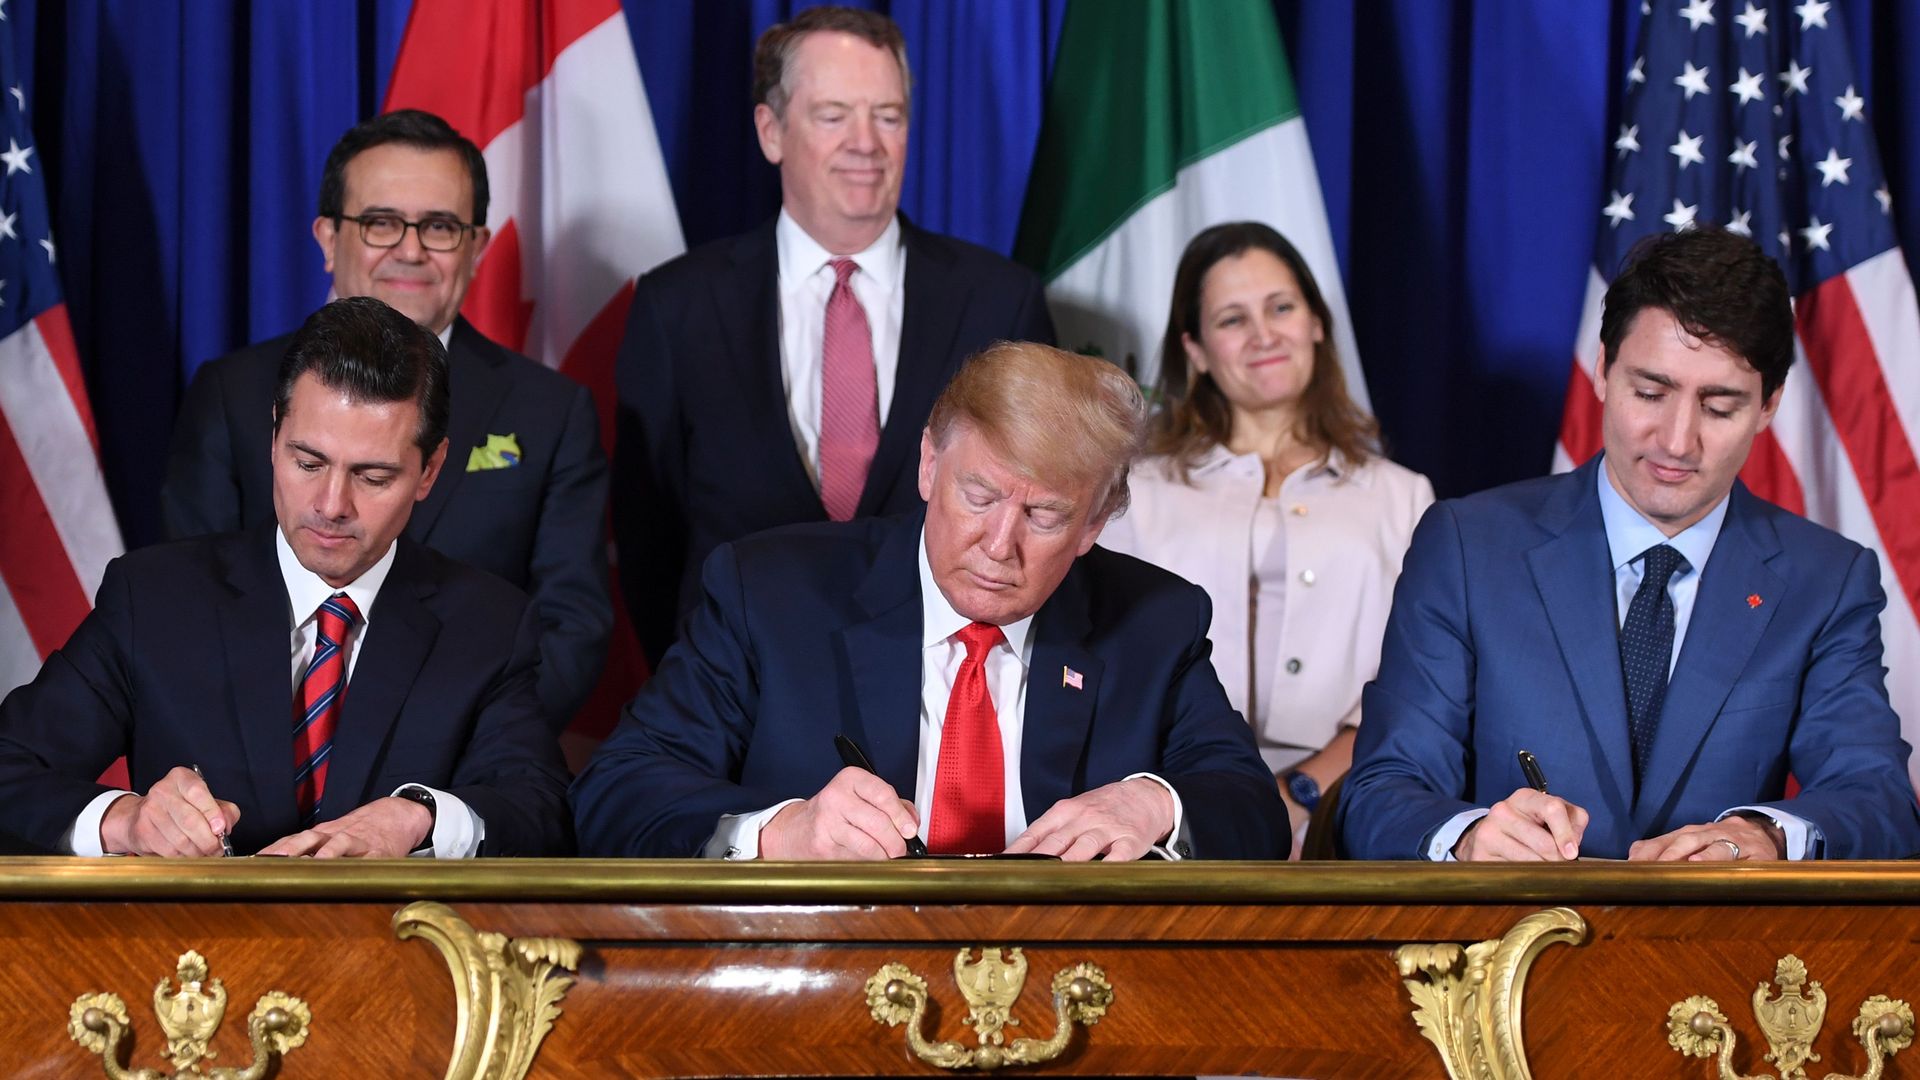 Mexico's President Enrique Pena Nieto US President Donald Trump and Canadian Prime Minister Justin Trudeau signing a trade deal